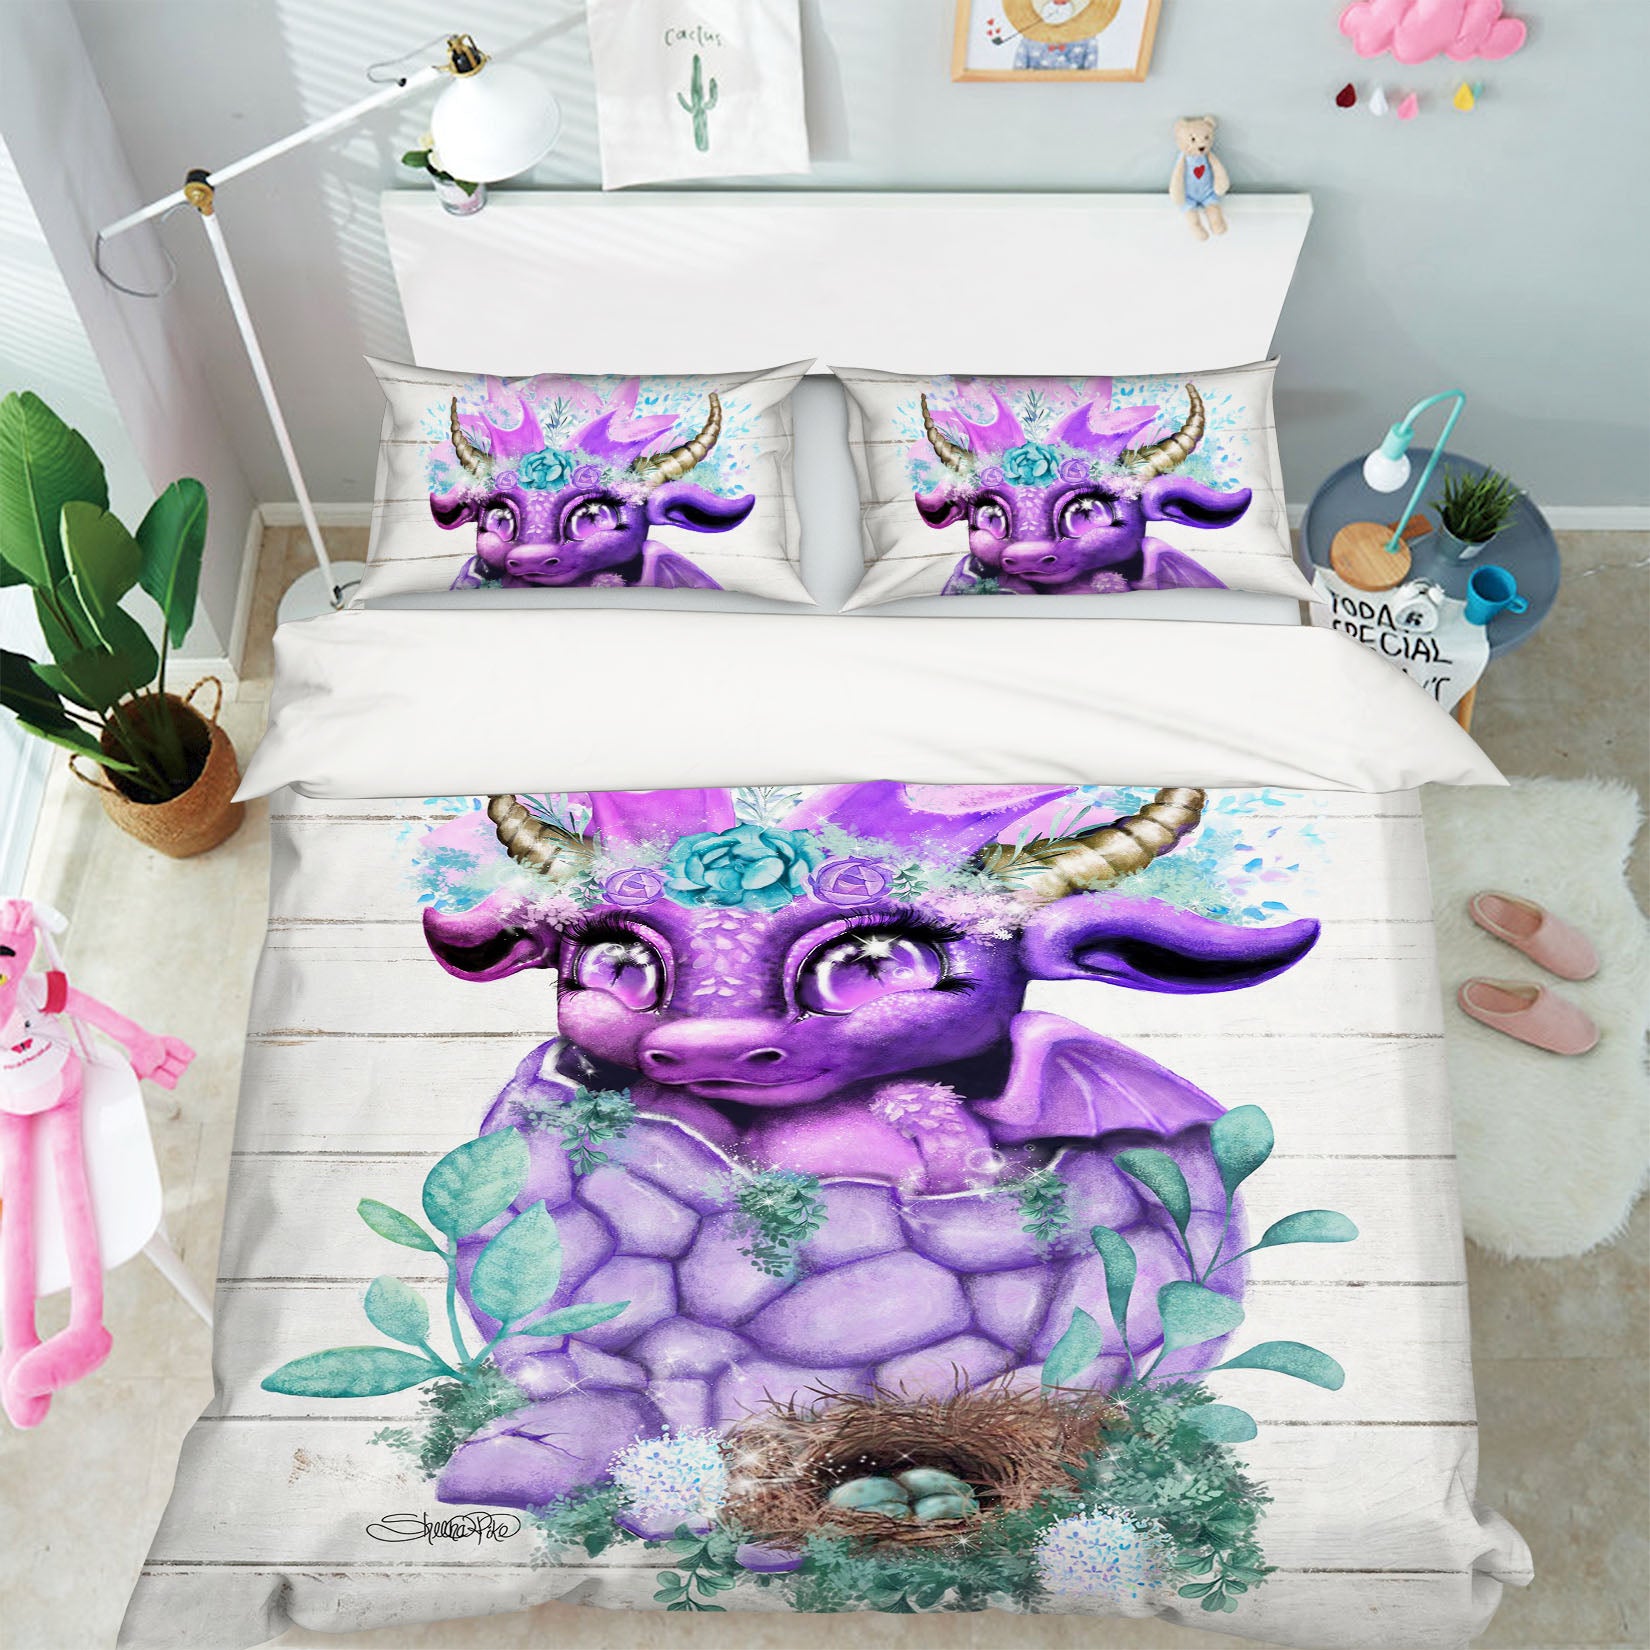 3D Cute Purple Dragon 8609 Sheena Pike Bedding Bed Pillowcases Quilt Cover Duvet Cover